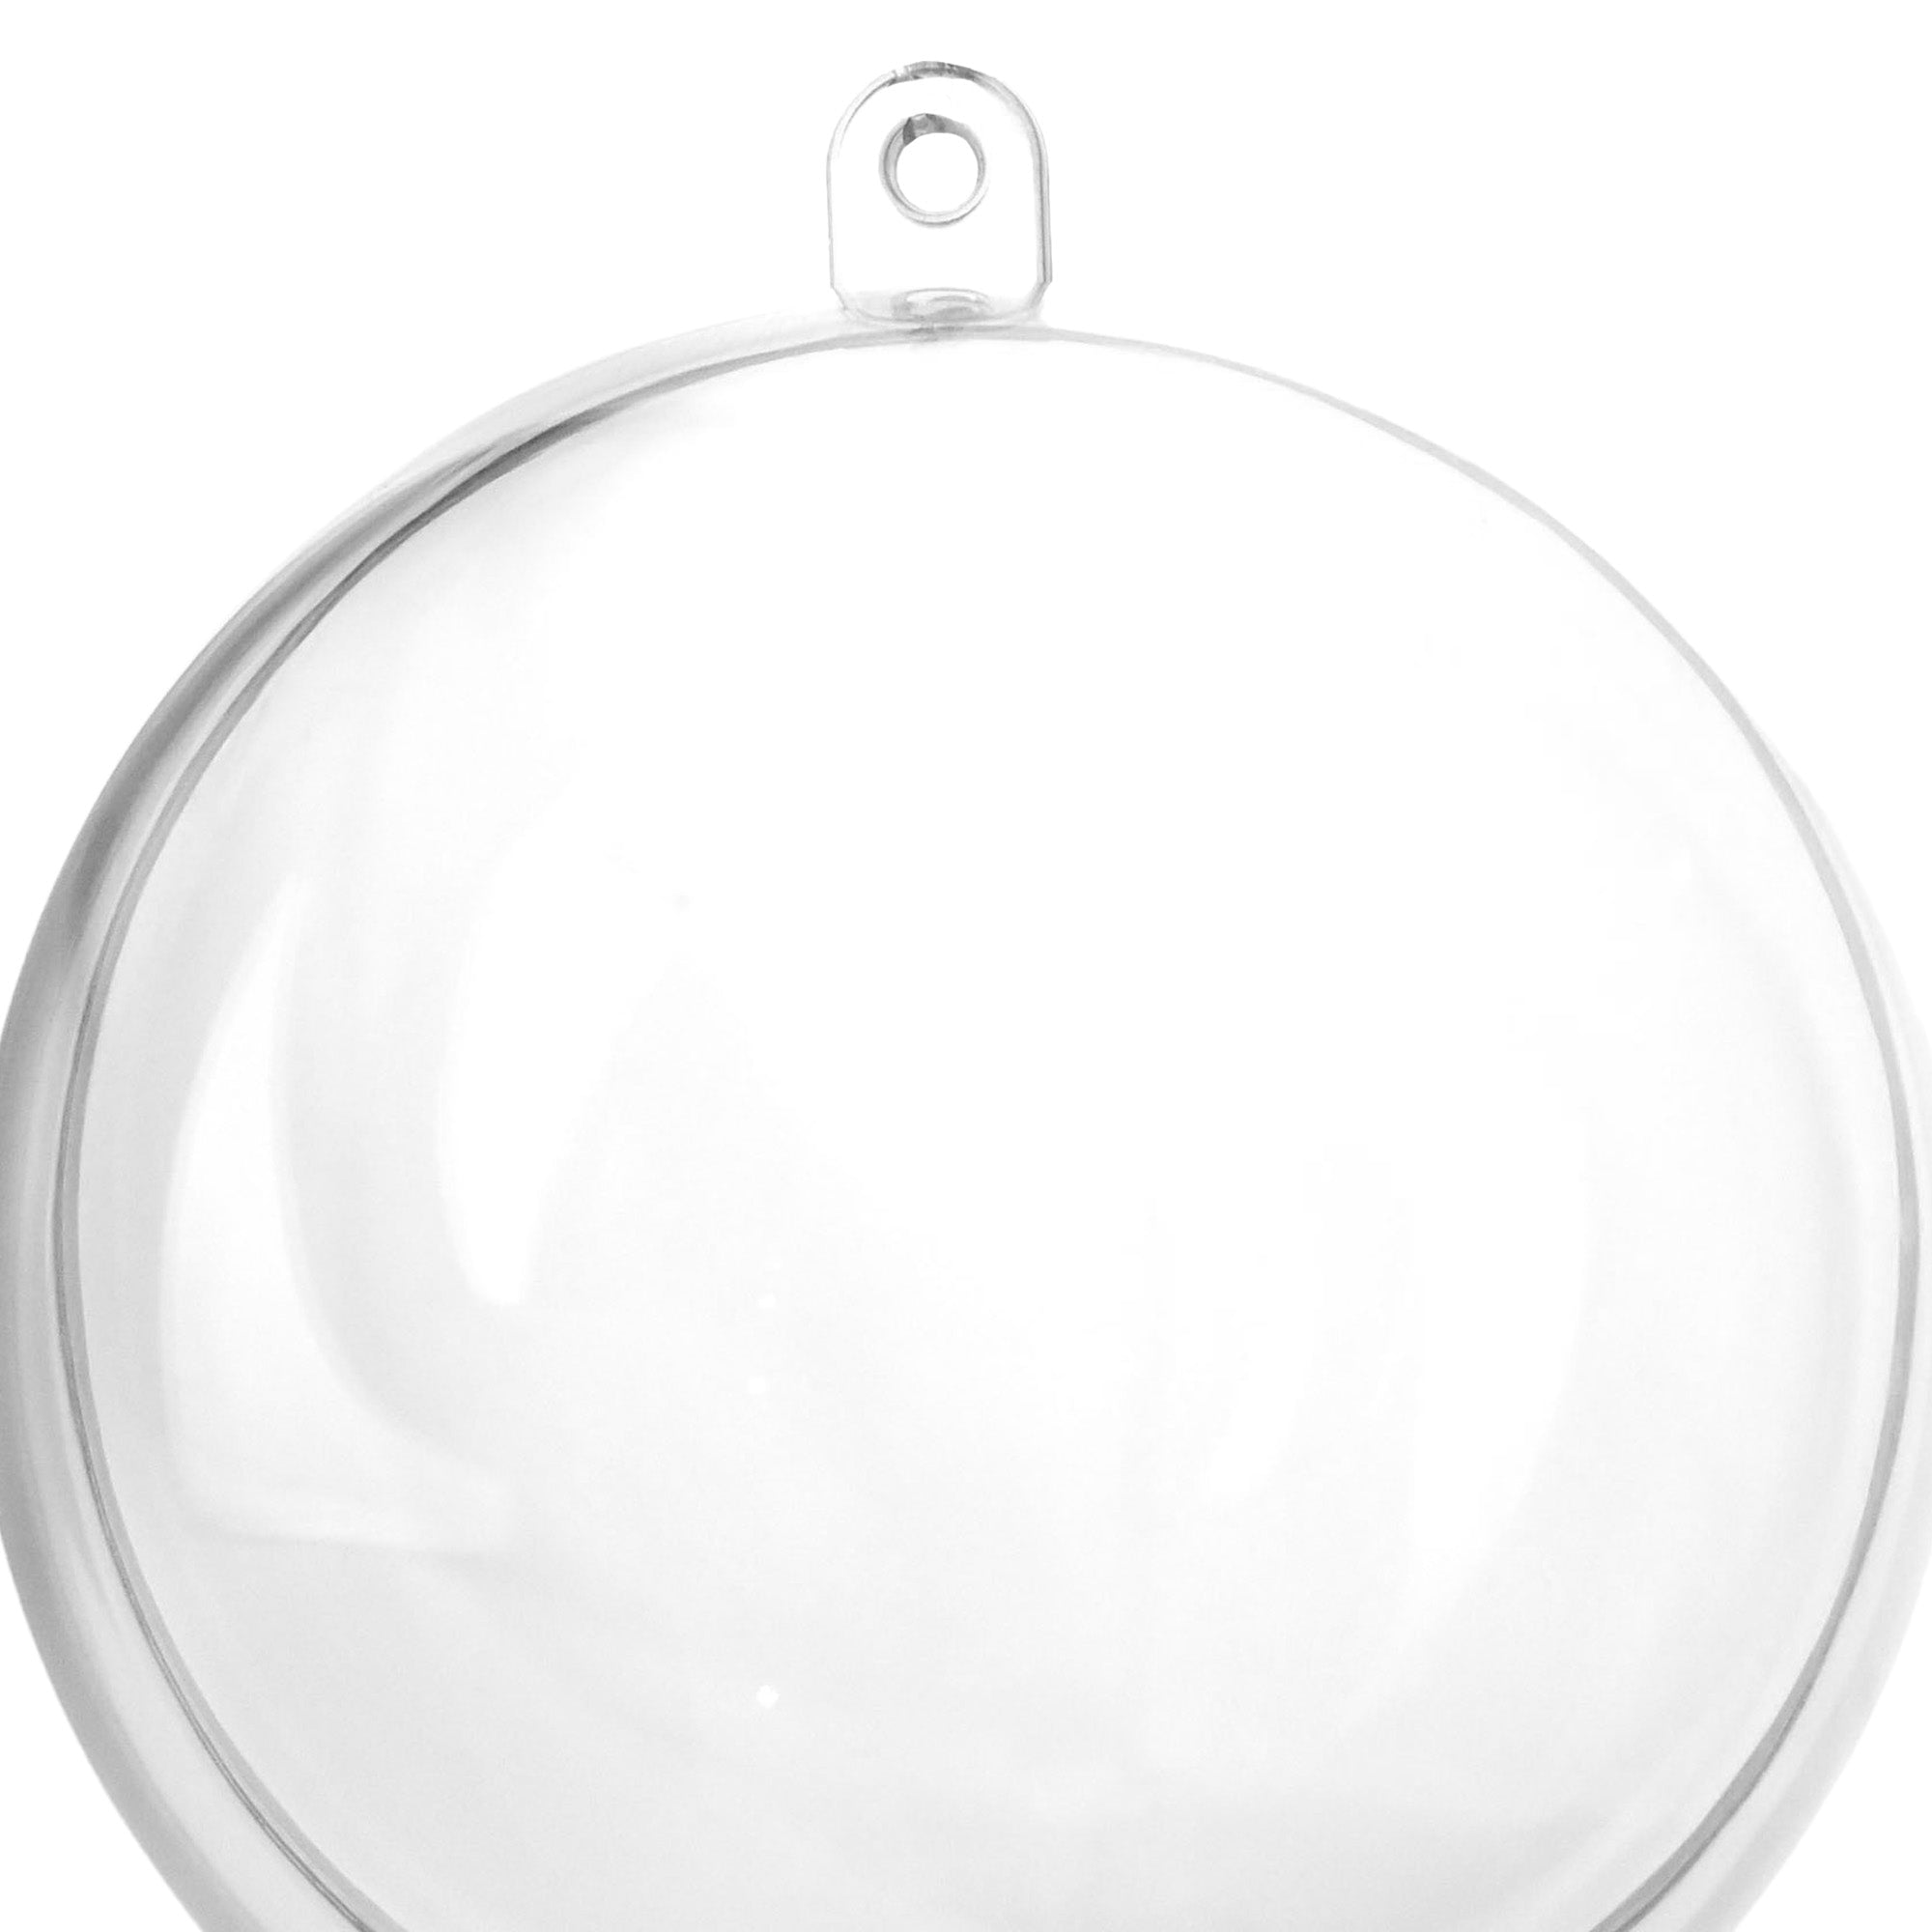 83 mm/3.27 inch Round Fillable Clear Plastic Ball Ornaments Clear